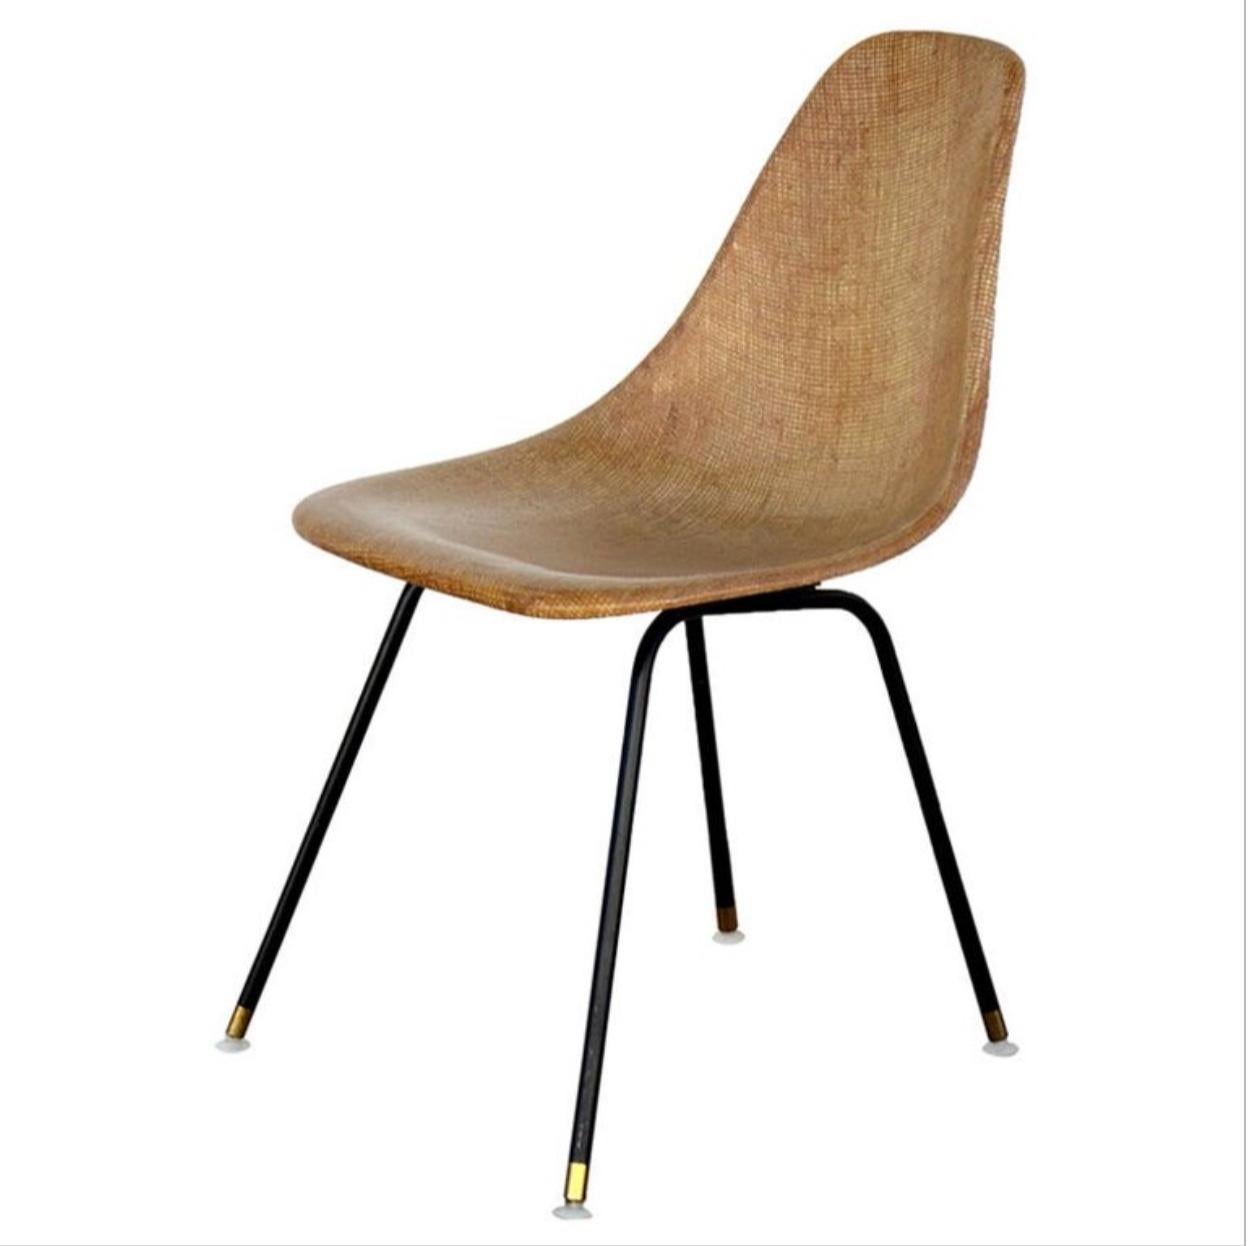 Single fiberglass encasted fabric mesh chair. Great for a desk or a side chair.